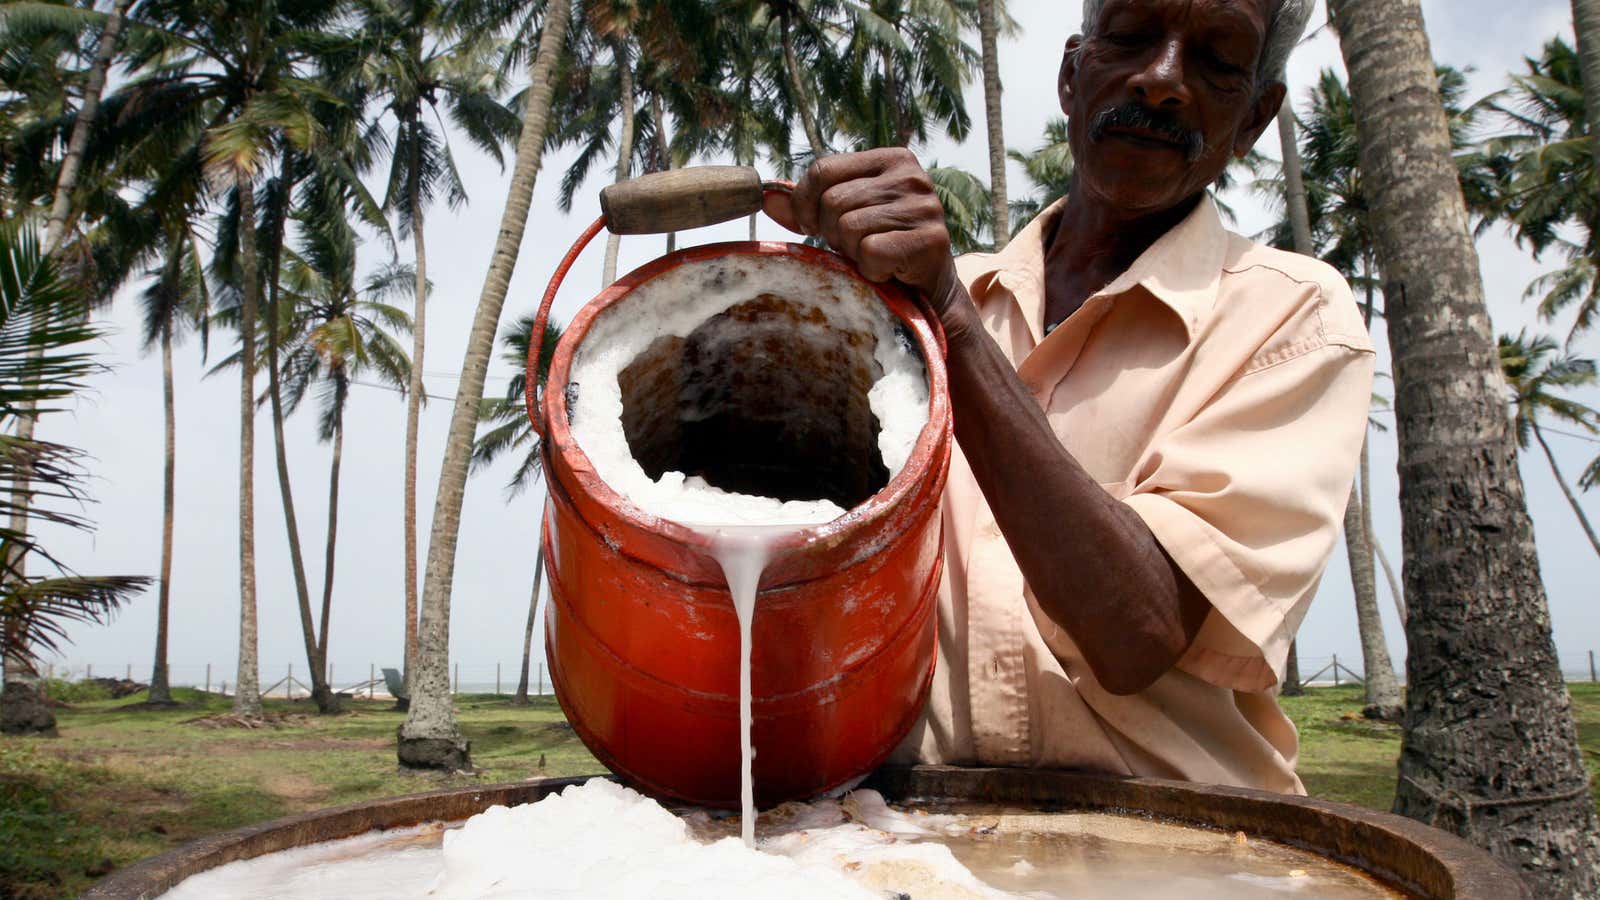 Asian countries will need to work to keep the taps of coconut water flowing.